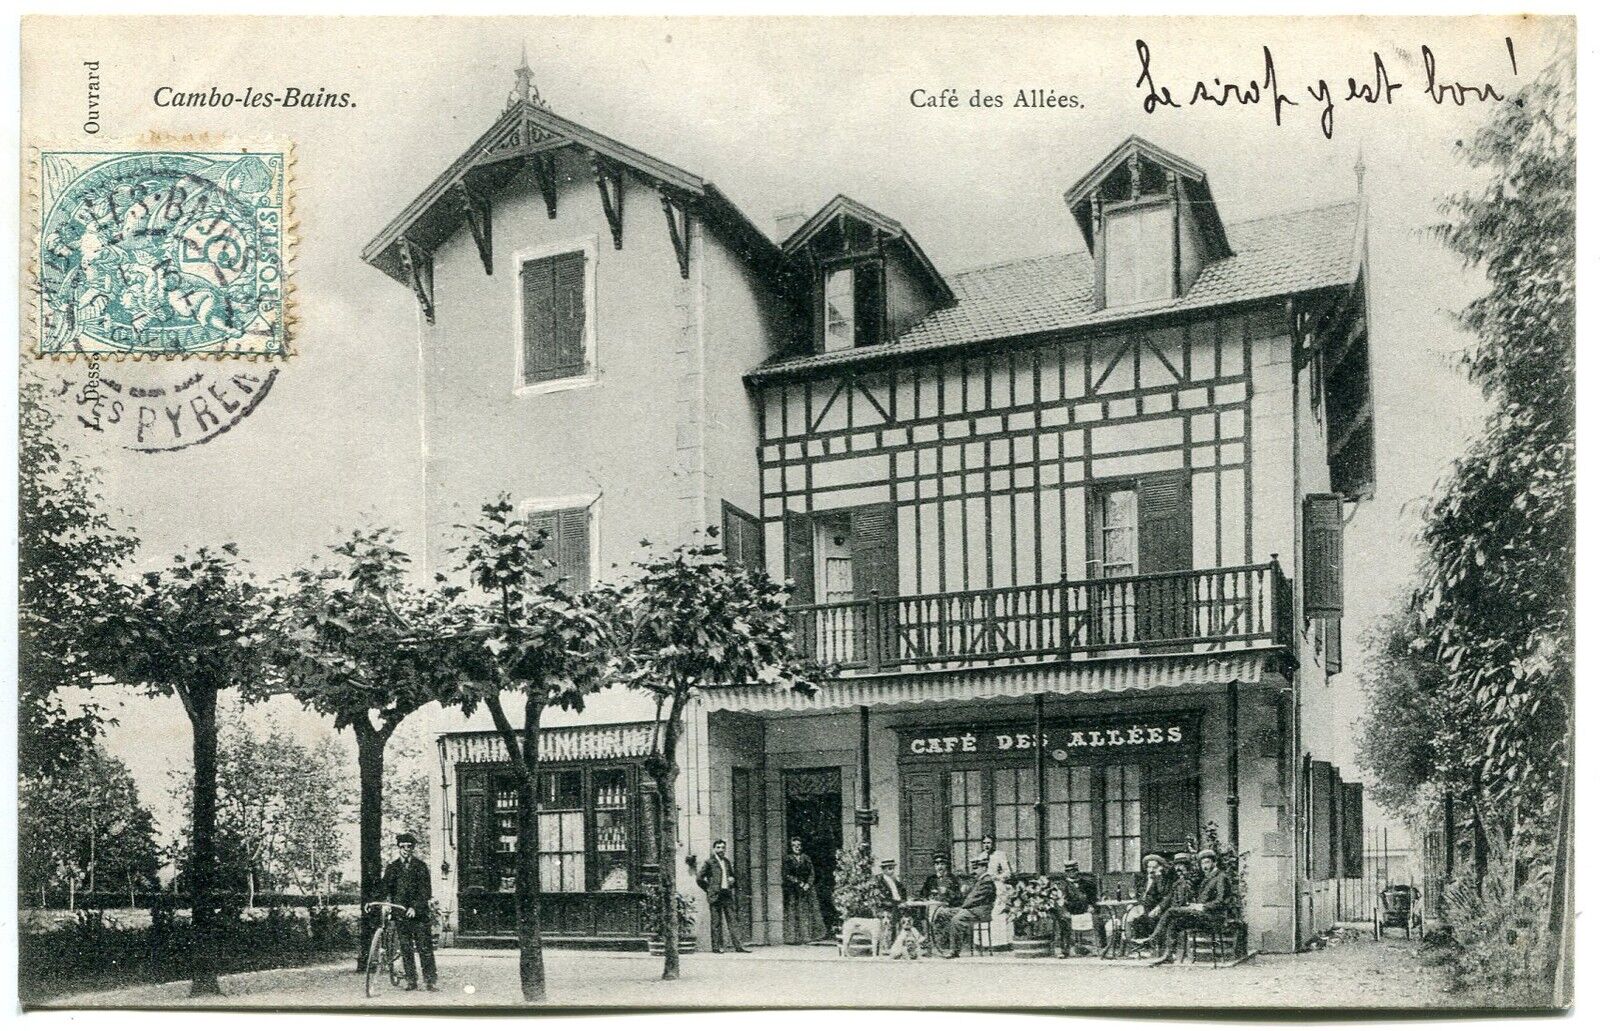 CARTE POSTALE CAMBO LES BAINS CAFE DES ALLEES 400759759553